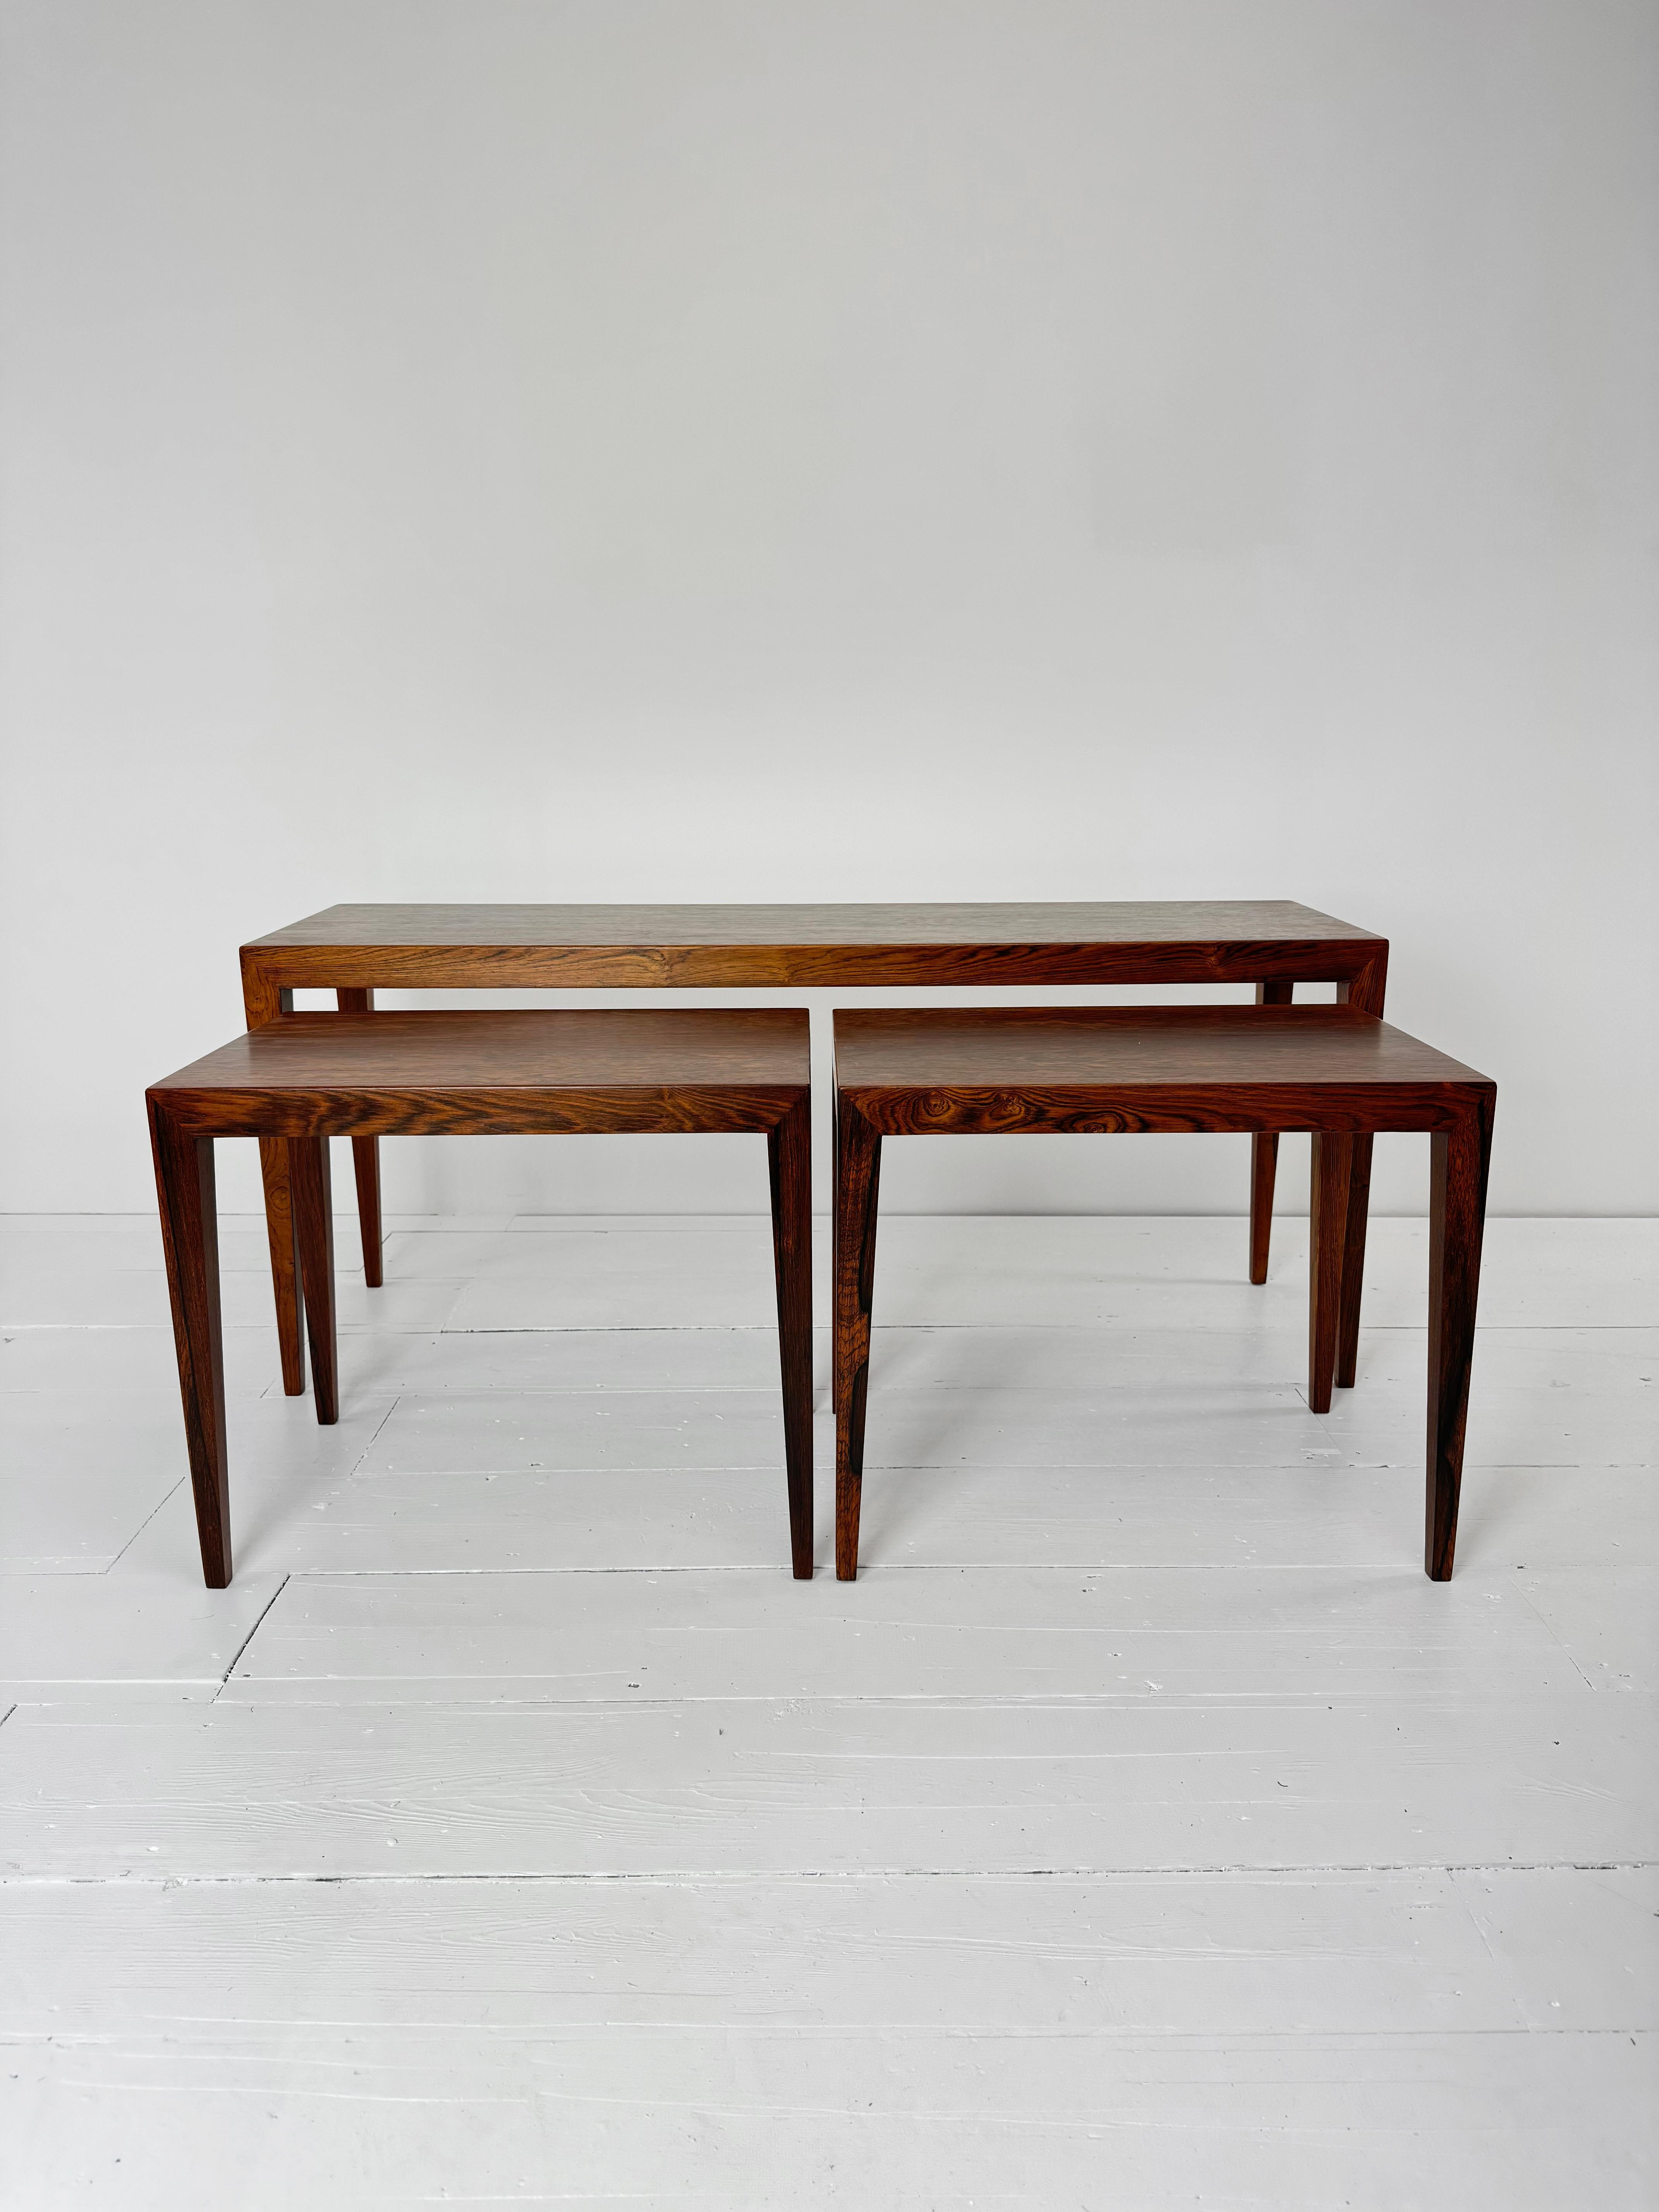 This stunning Brazilian Rosewood nesting tables set is a true vintage find, designed by renowned Danish designer Severin Hansen for the esteemed Haslev Møbelsnedkeri. Crafted from rich and exquisite Teak fame covered with Brazilian Rosewood veneer,